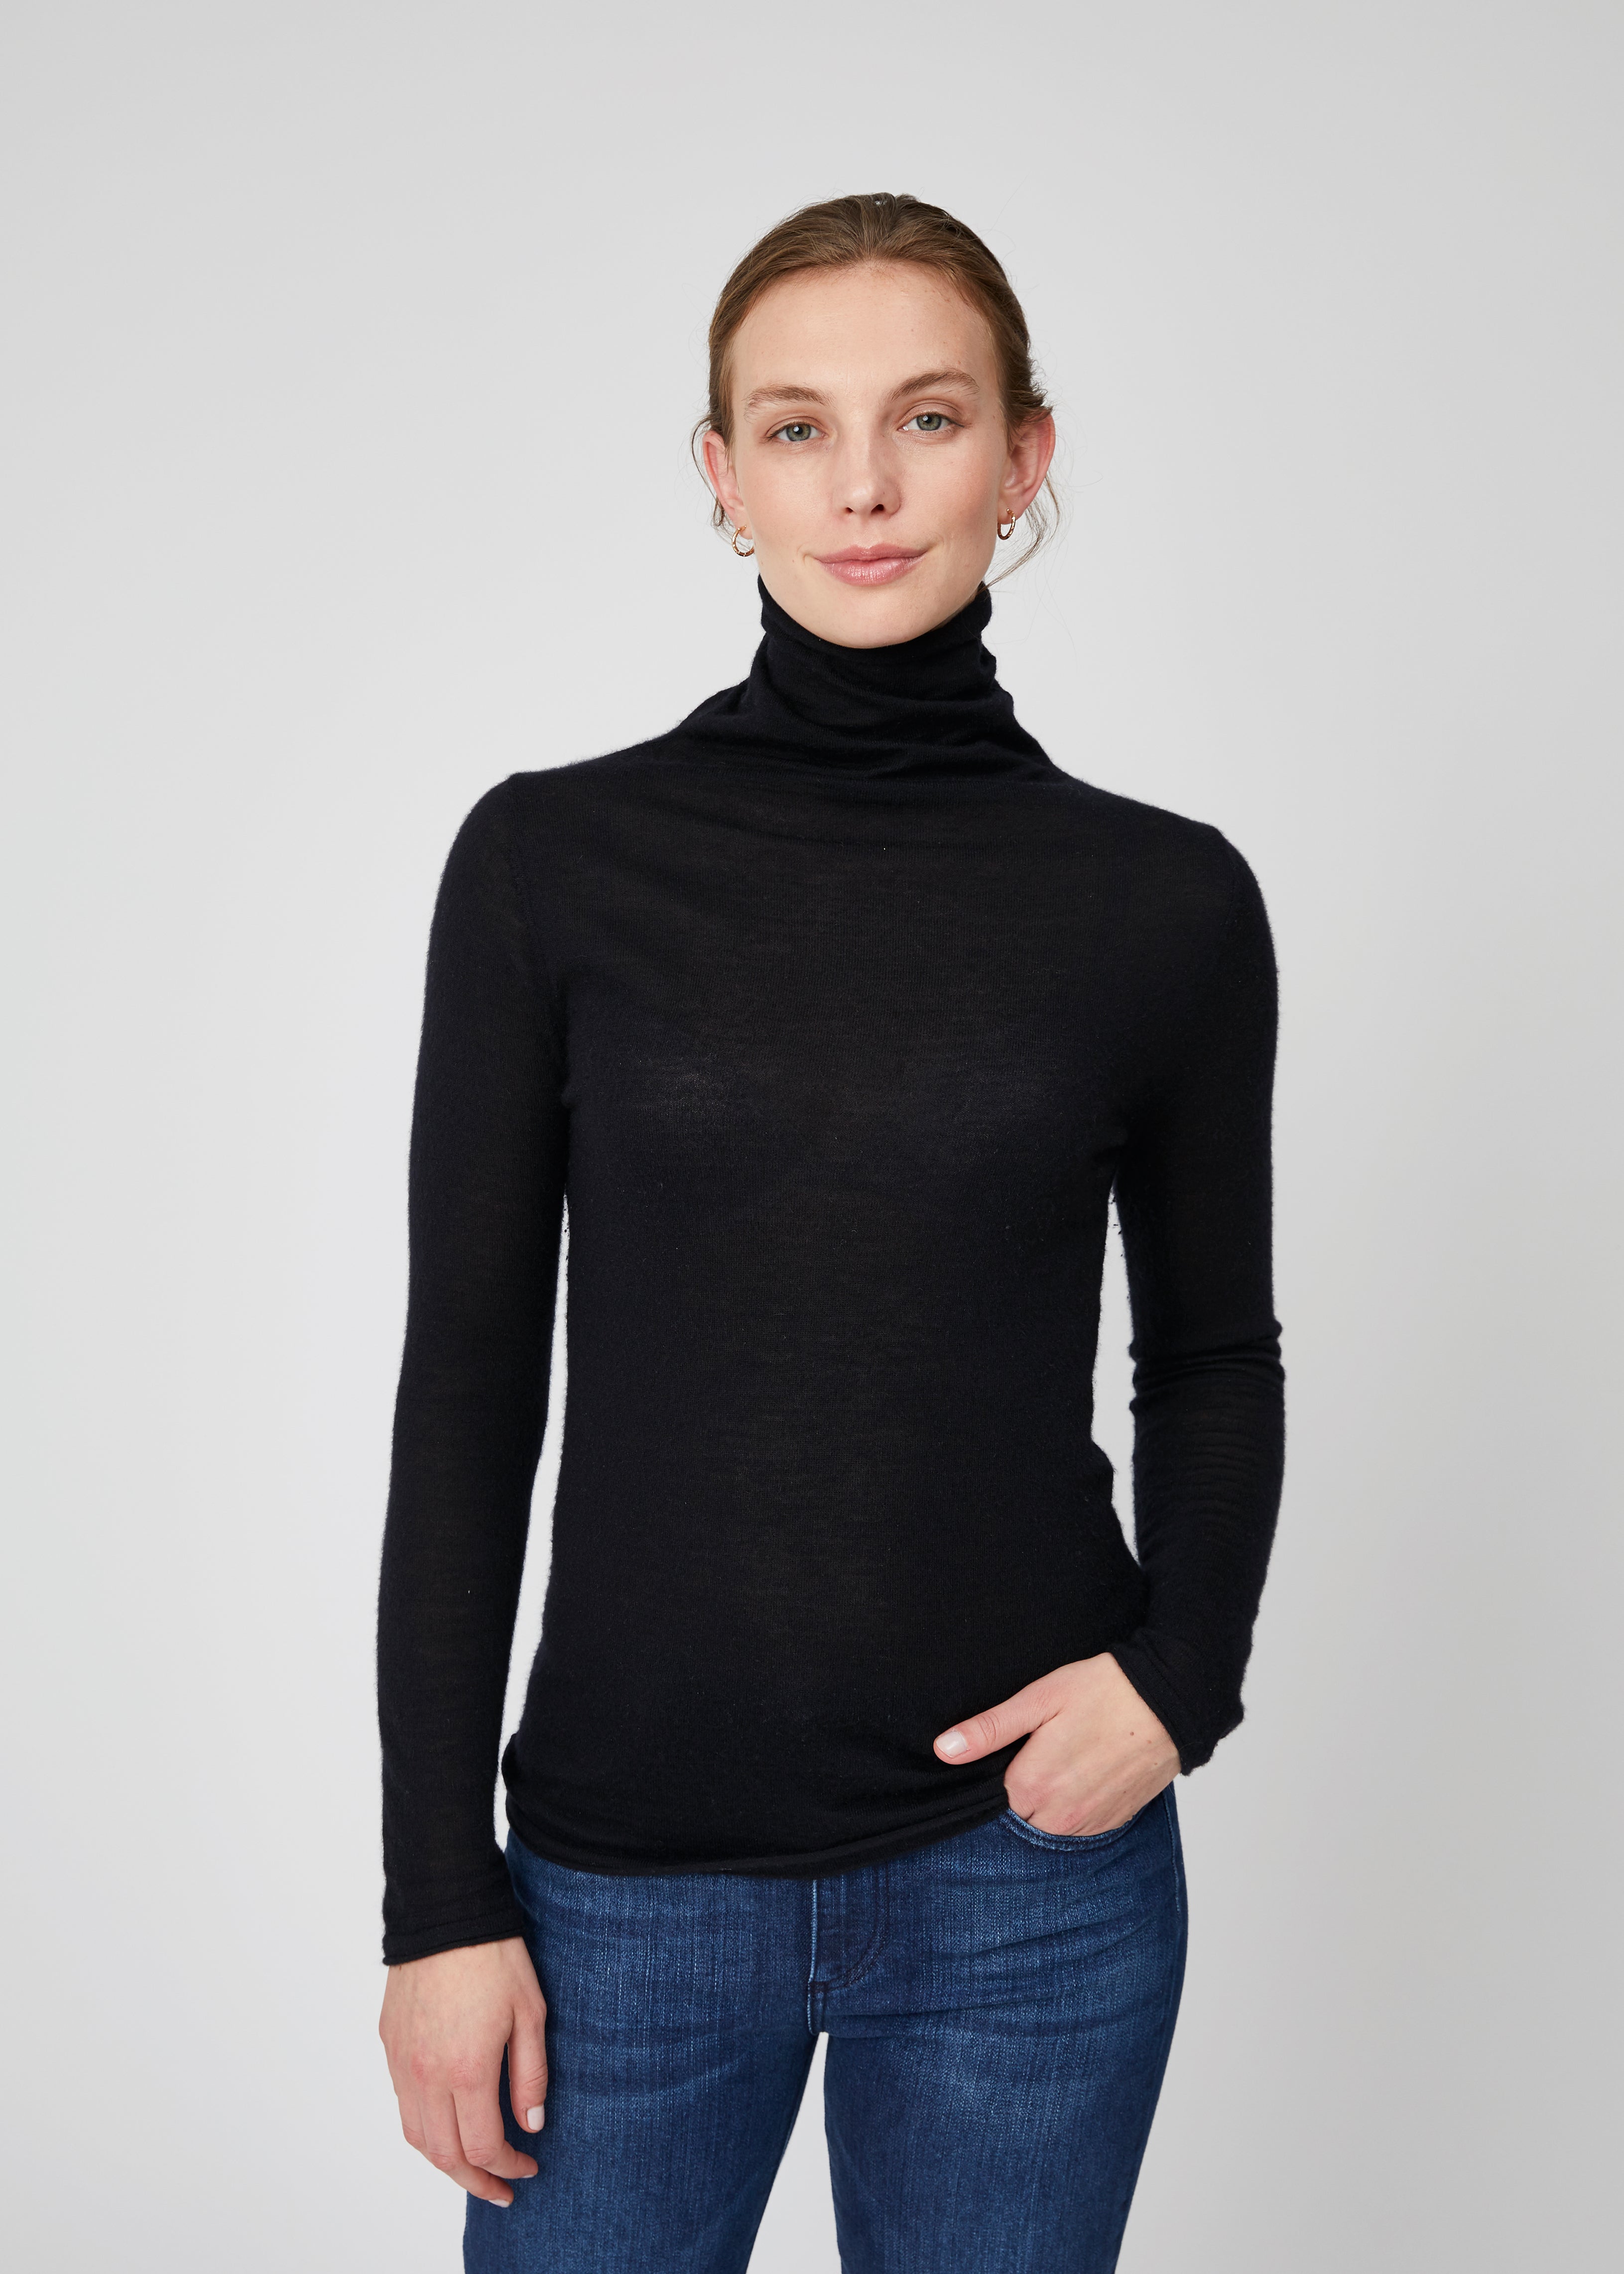 Cashmere Blend Turtleneck | Sustainable | Theo and George – Theo + George